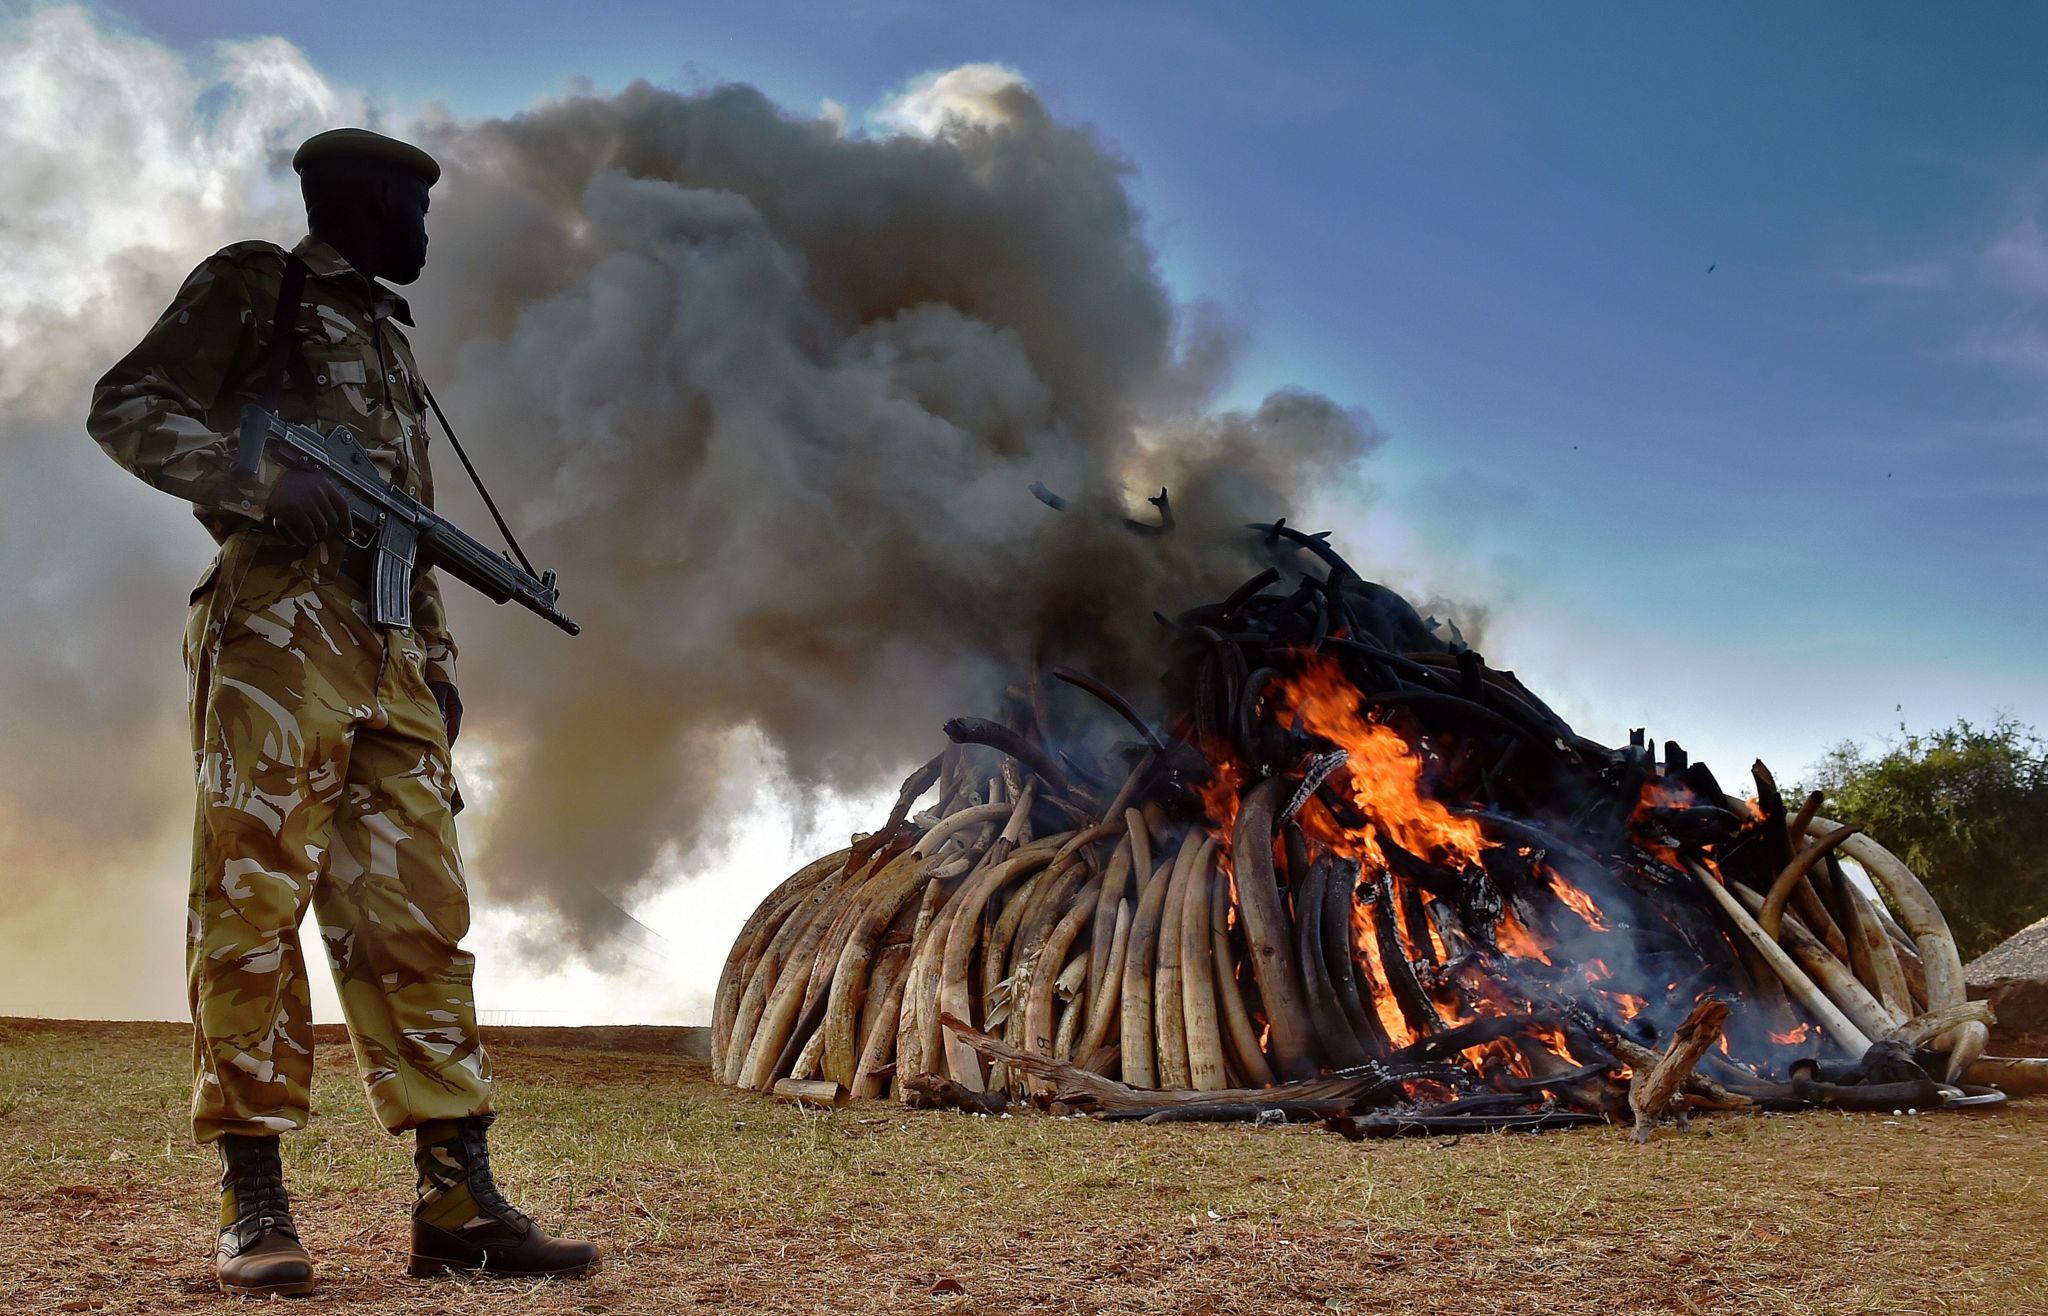 A Kenya Wildlife Services (KWS) officer stands near a burning pile of 15 tonnes of elephant ivory seized in Kenya at Nairobi National Park on 3 March, 2015.